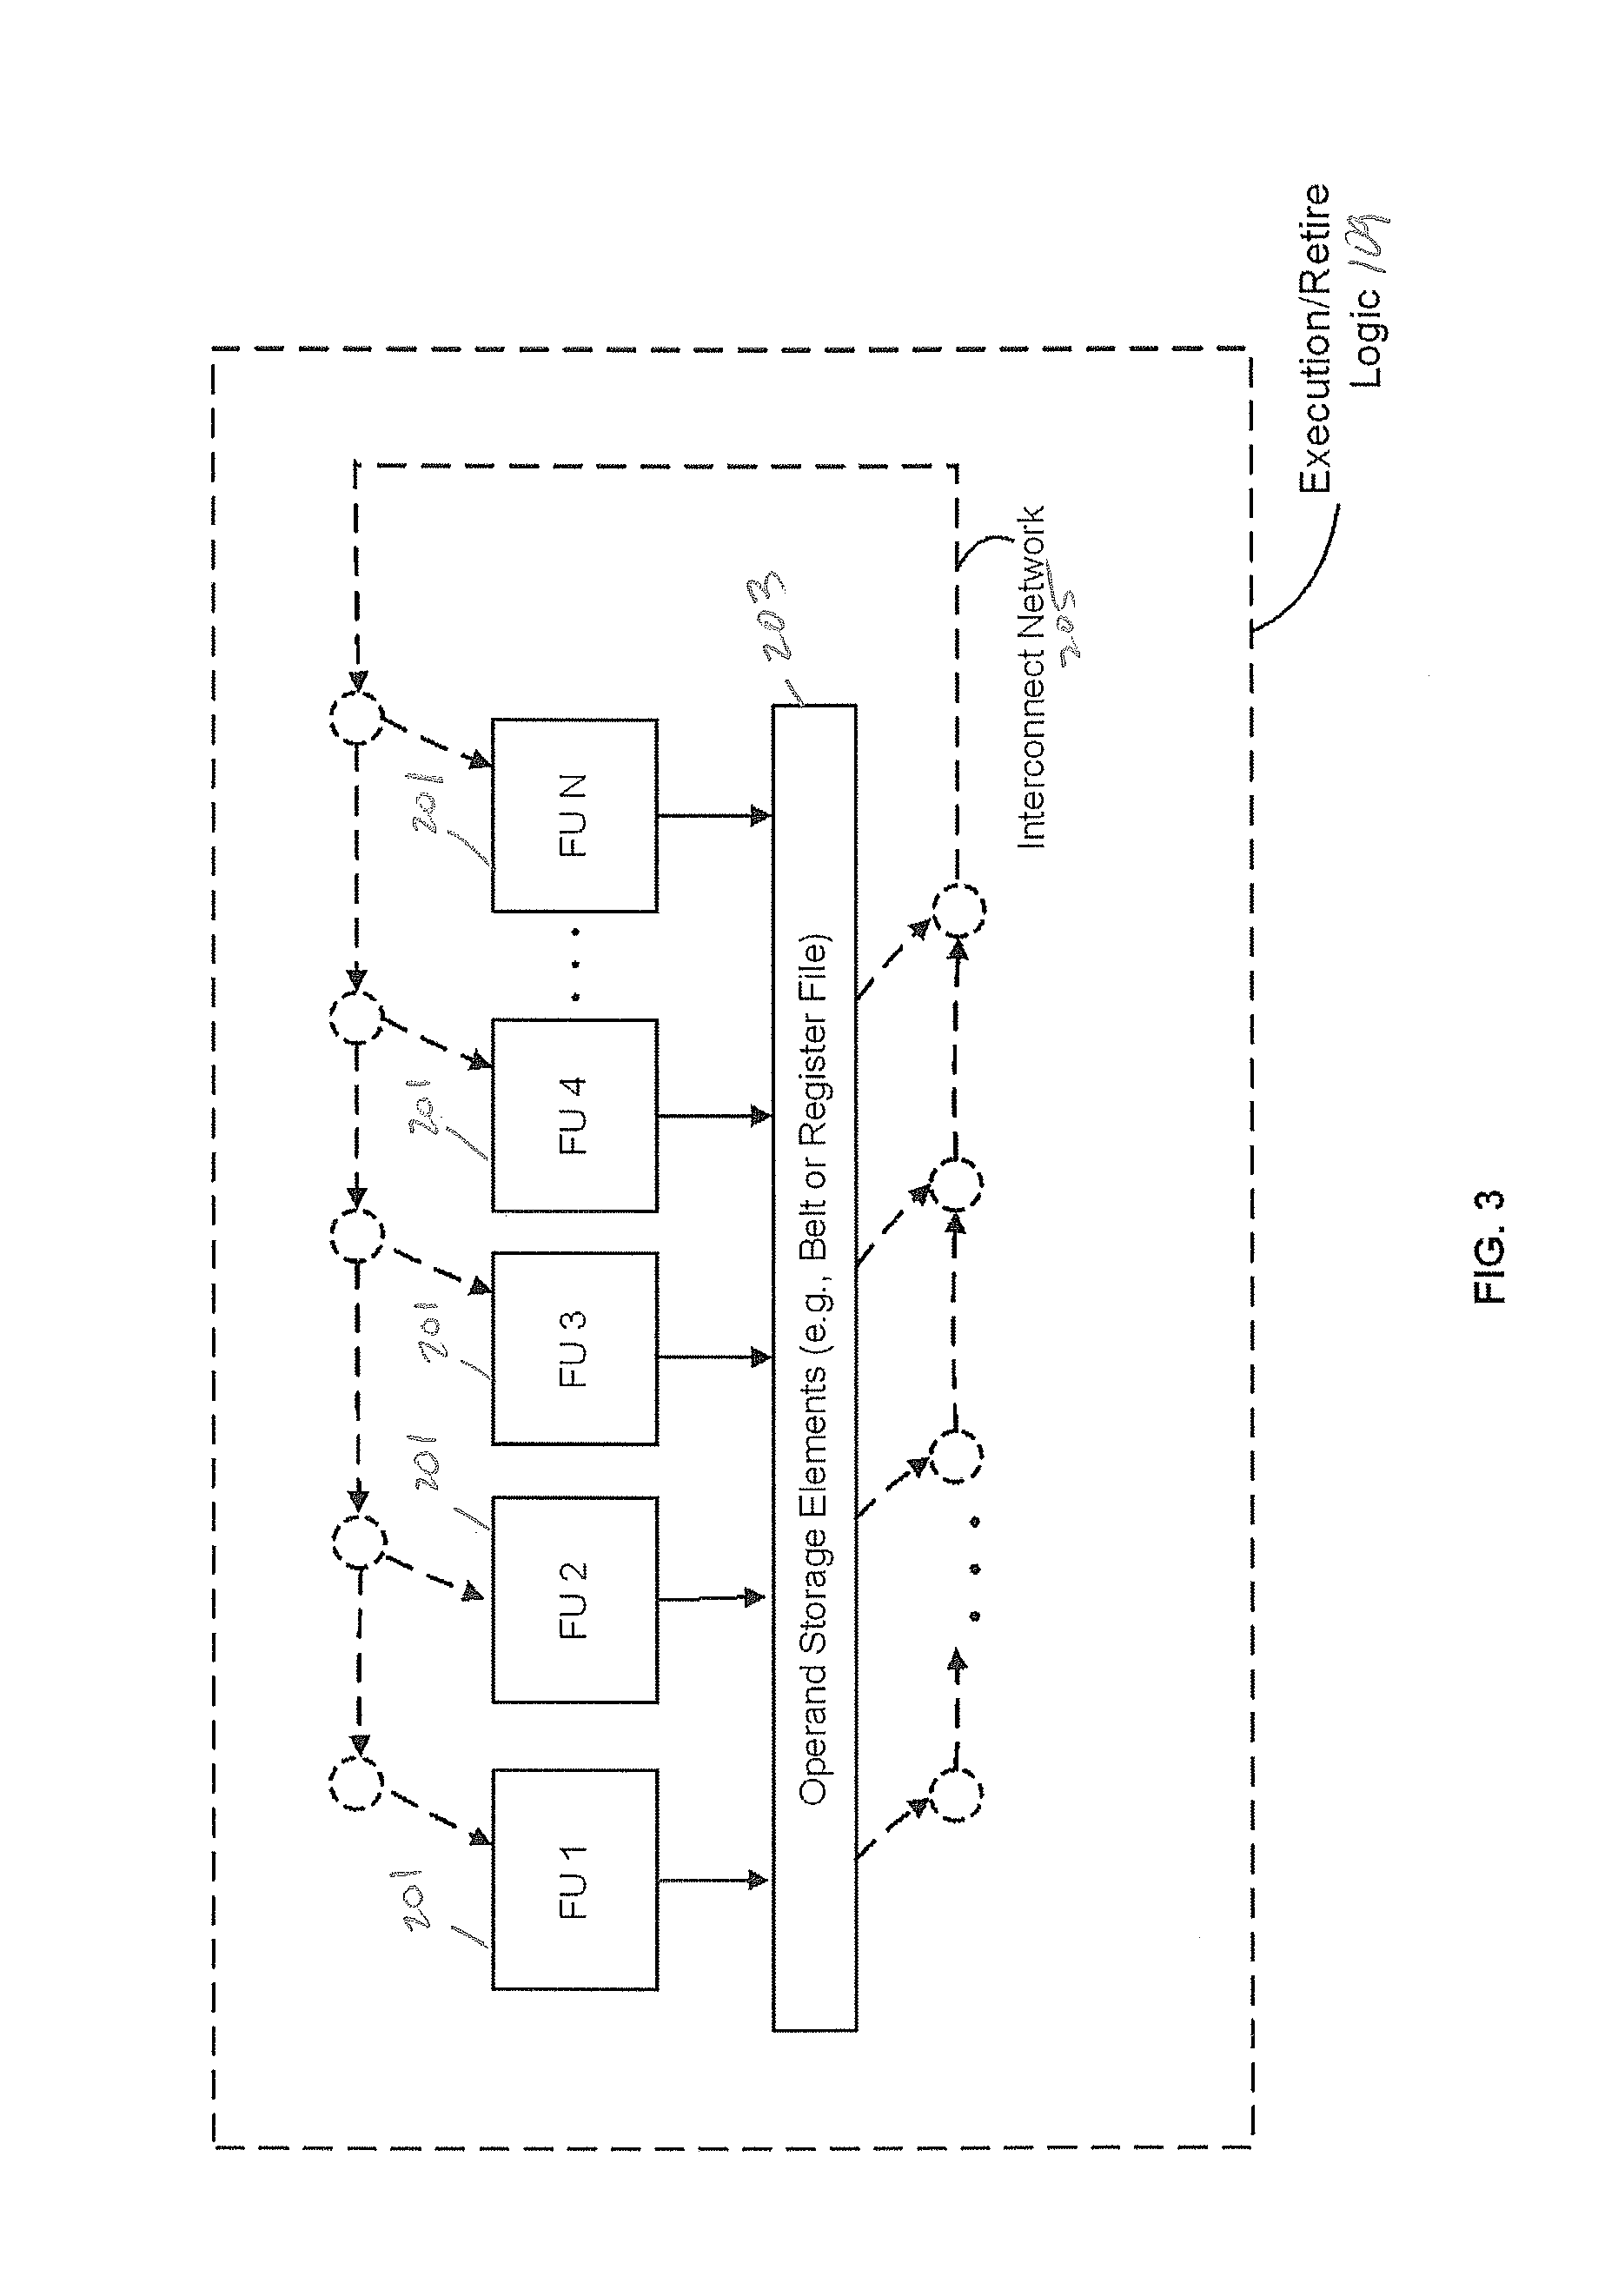 Computer Processor Employing Cache Memory Storing Backless Cache Lines